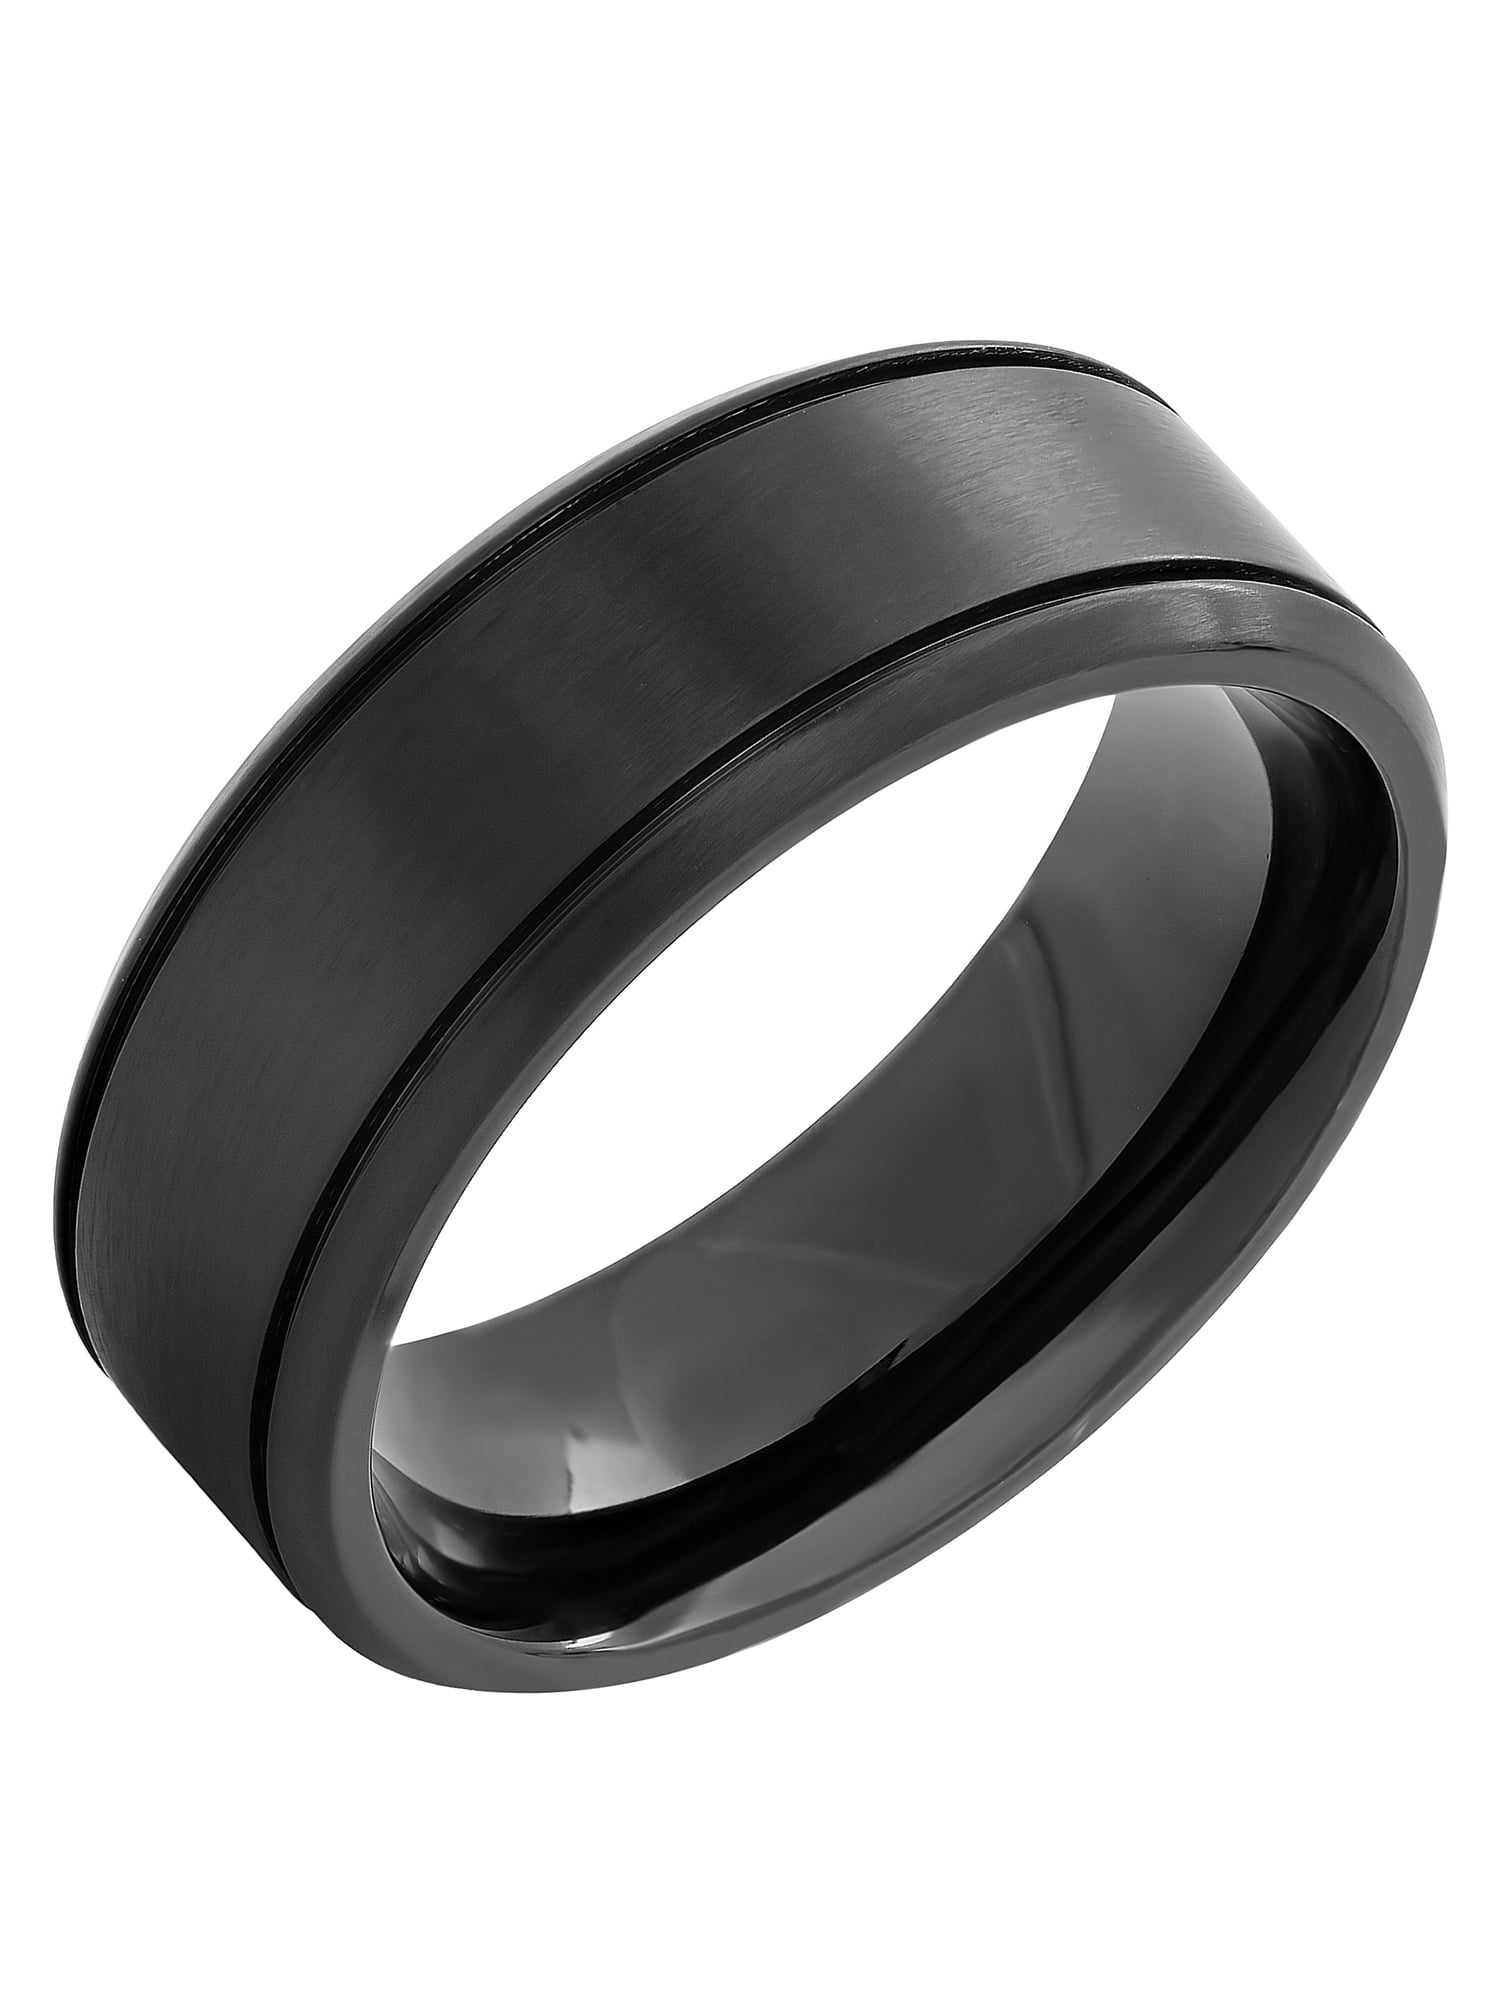 Details about   BOLD MENS INOX BLACK & BLUE IP STAINLESS STEEL RECTANGLE CENTER BAND RING 